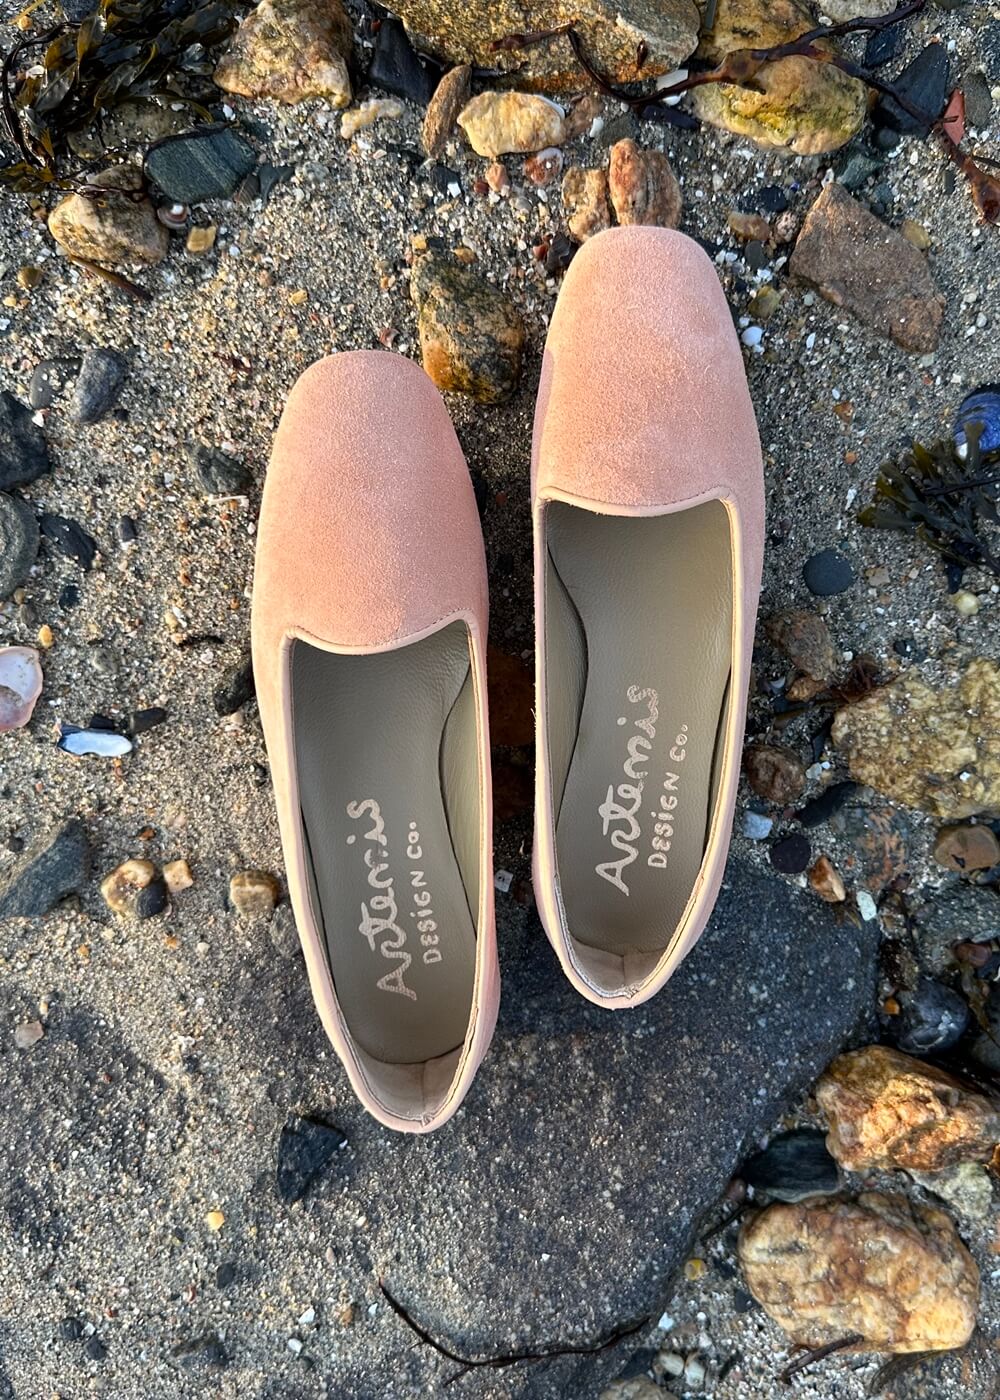 Artemis Design & Co's Women's Suede Loafers in pink are the perfect combination of style and comfort. Crafted with premium suede materials, these loafers feature a sleek design with attention to detail (Front View)